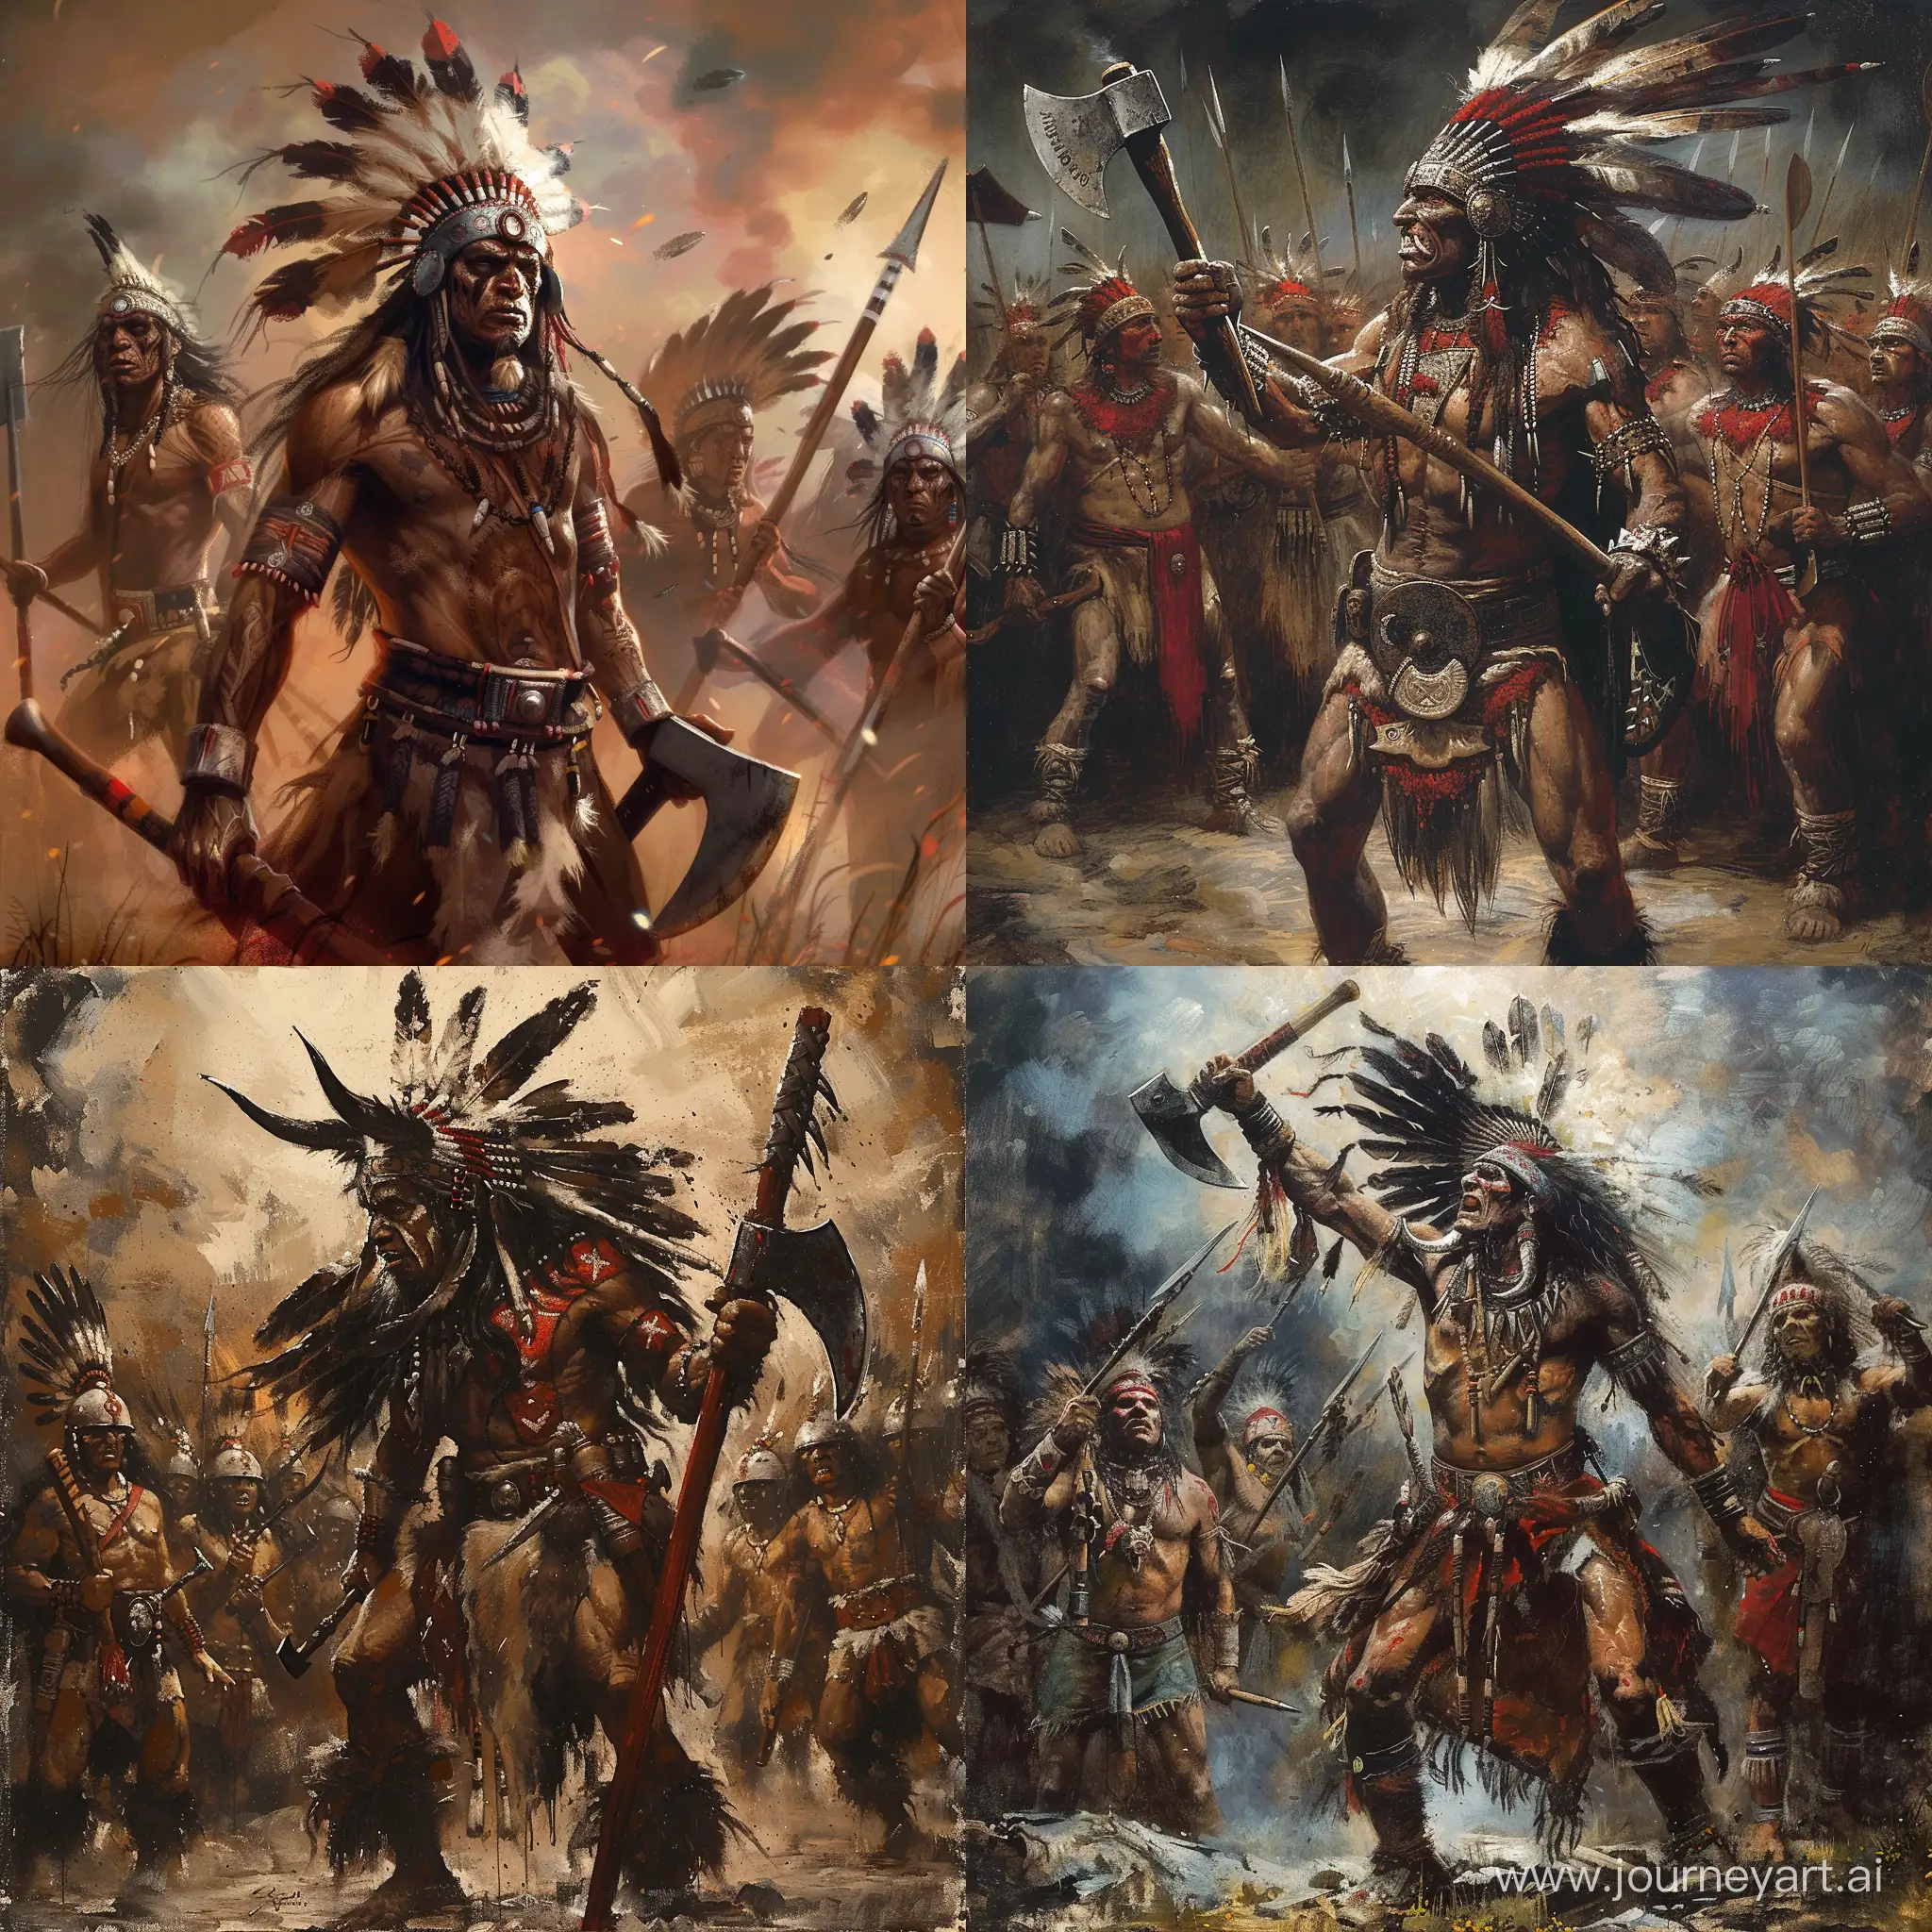 A Indian who’s half demon with his troops with a tomahawk 